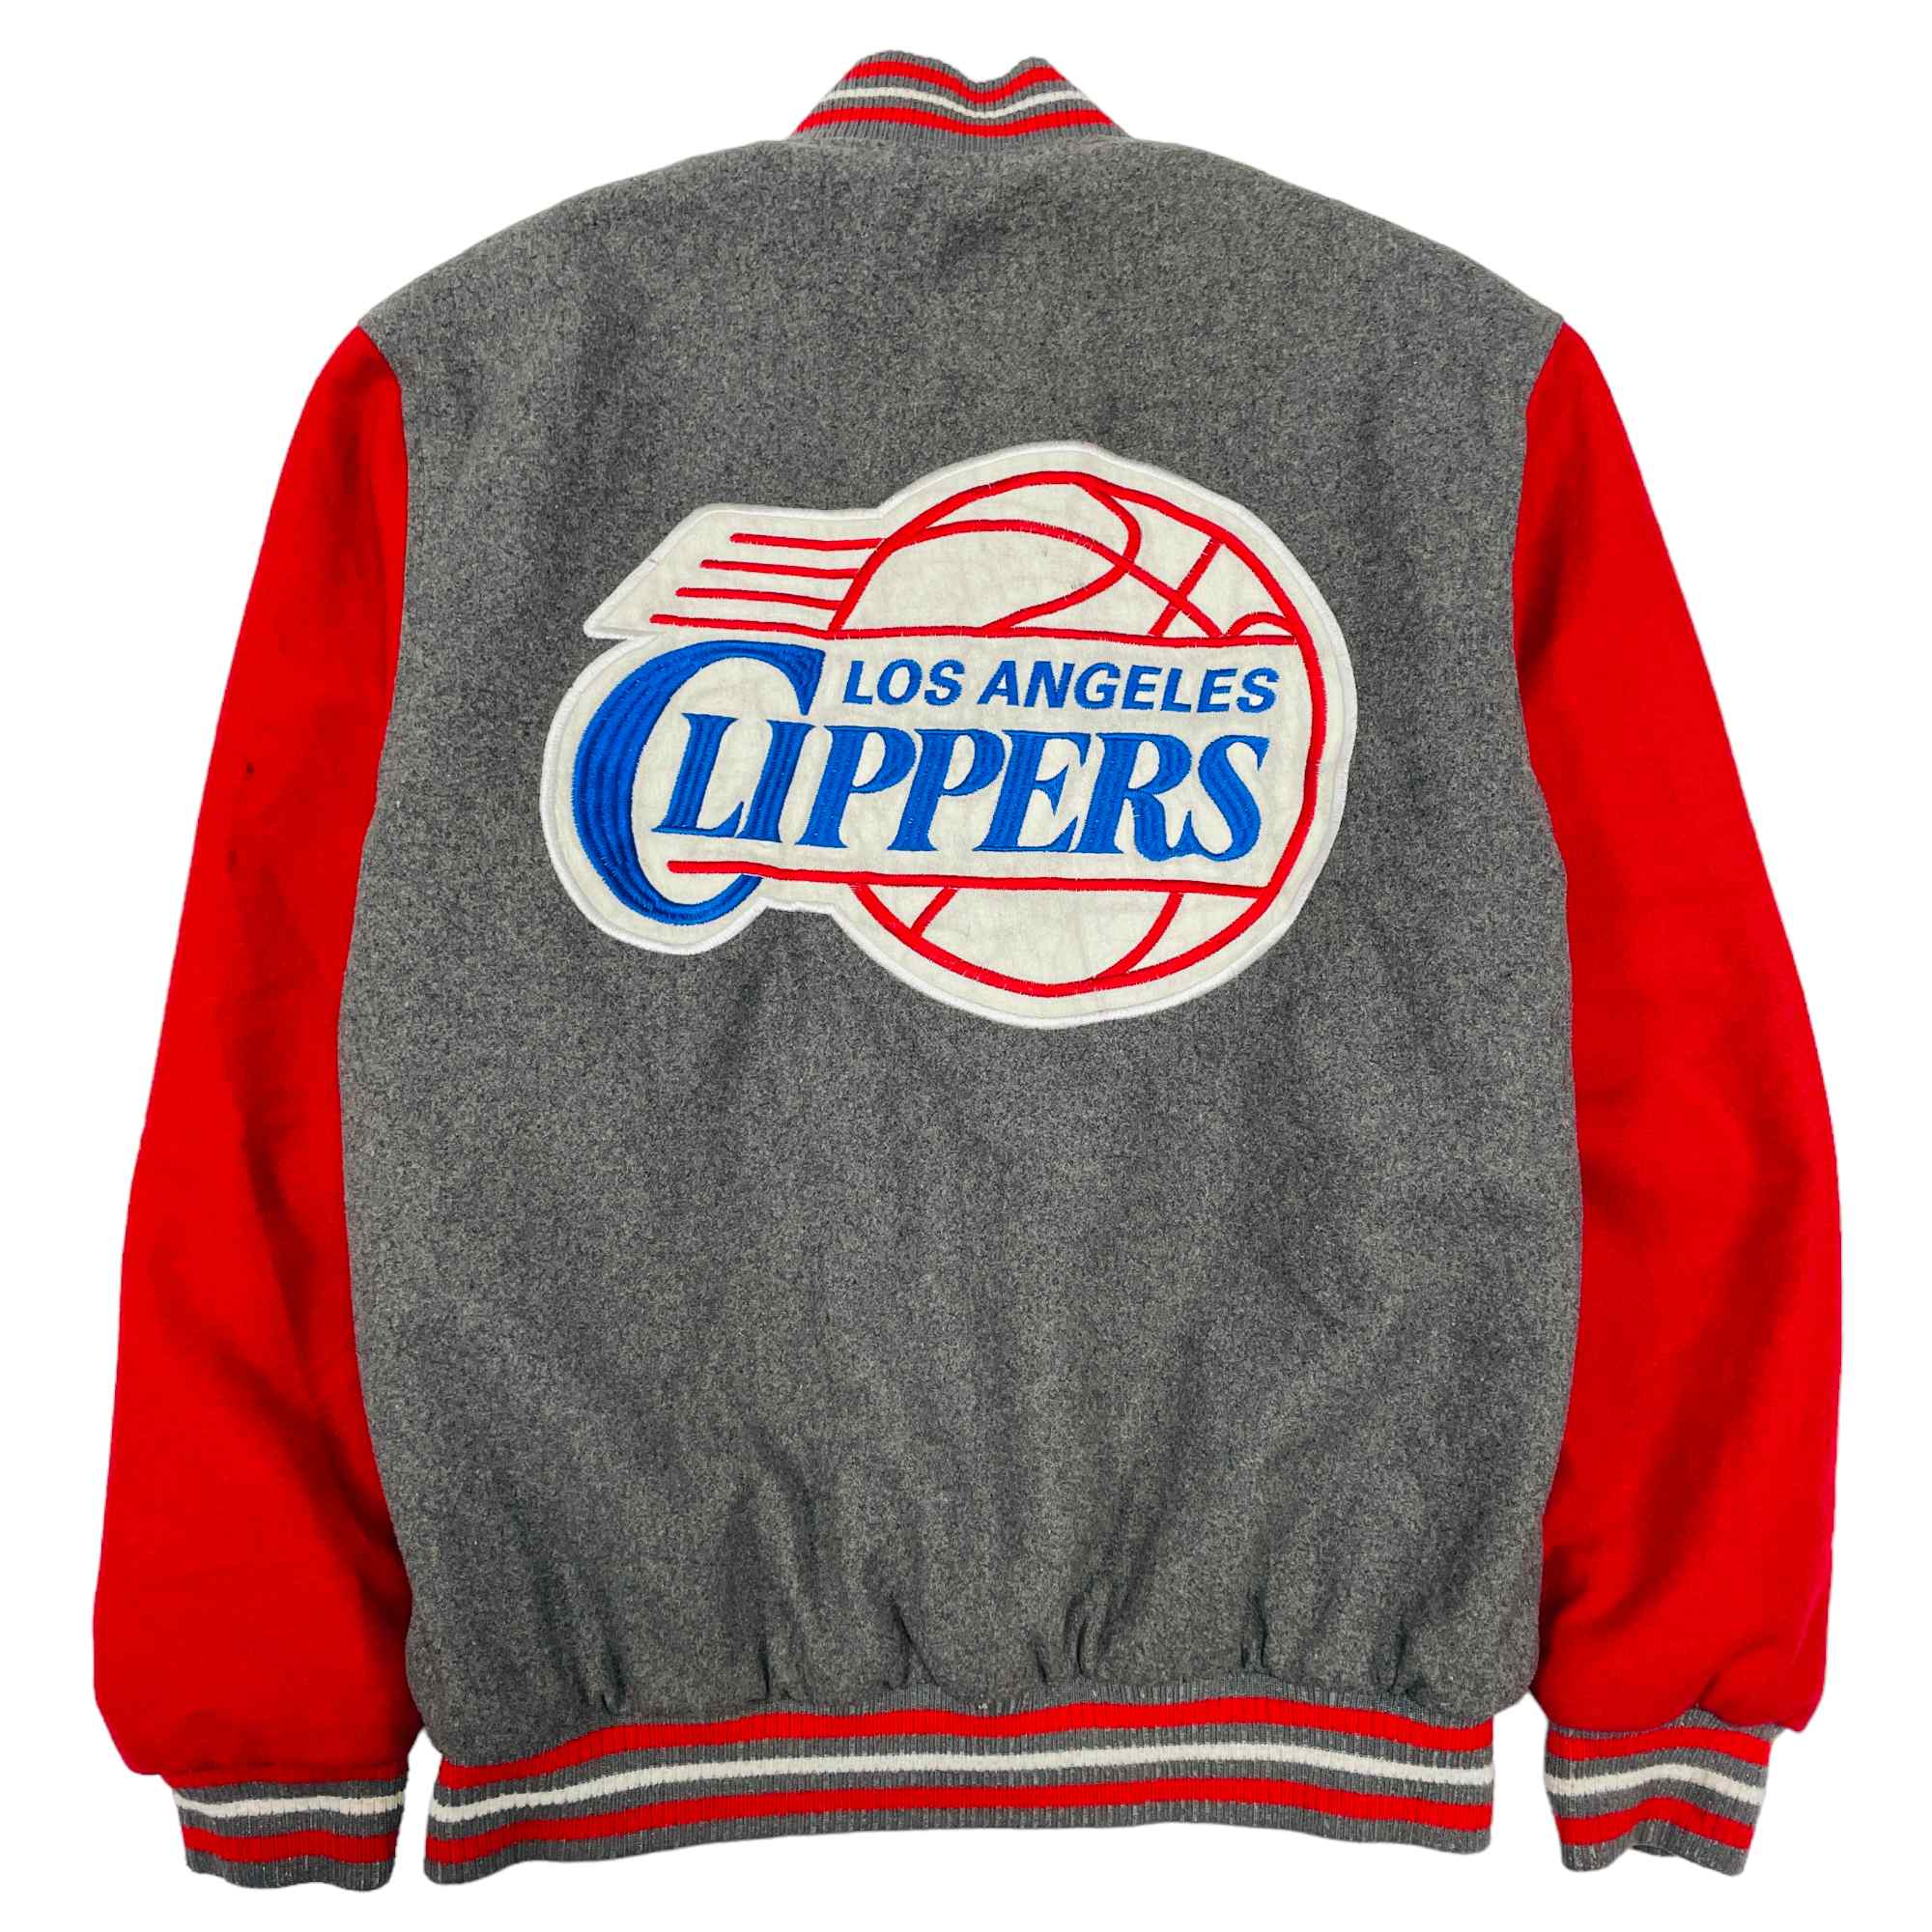 Los Angeles Clippers NBA Varsity Jacket With Back Patch - Large